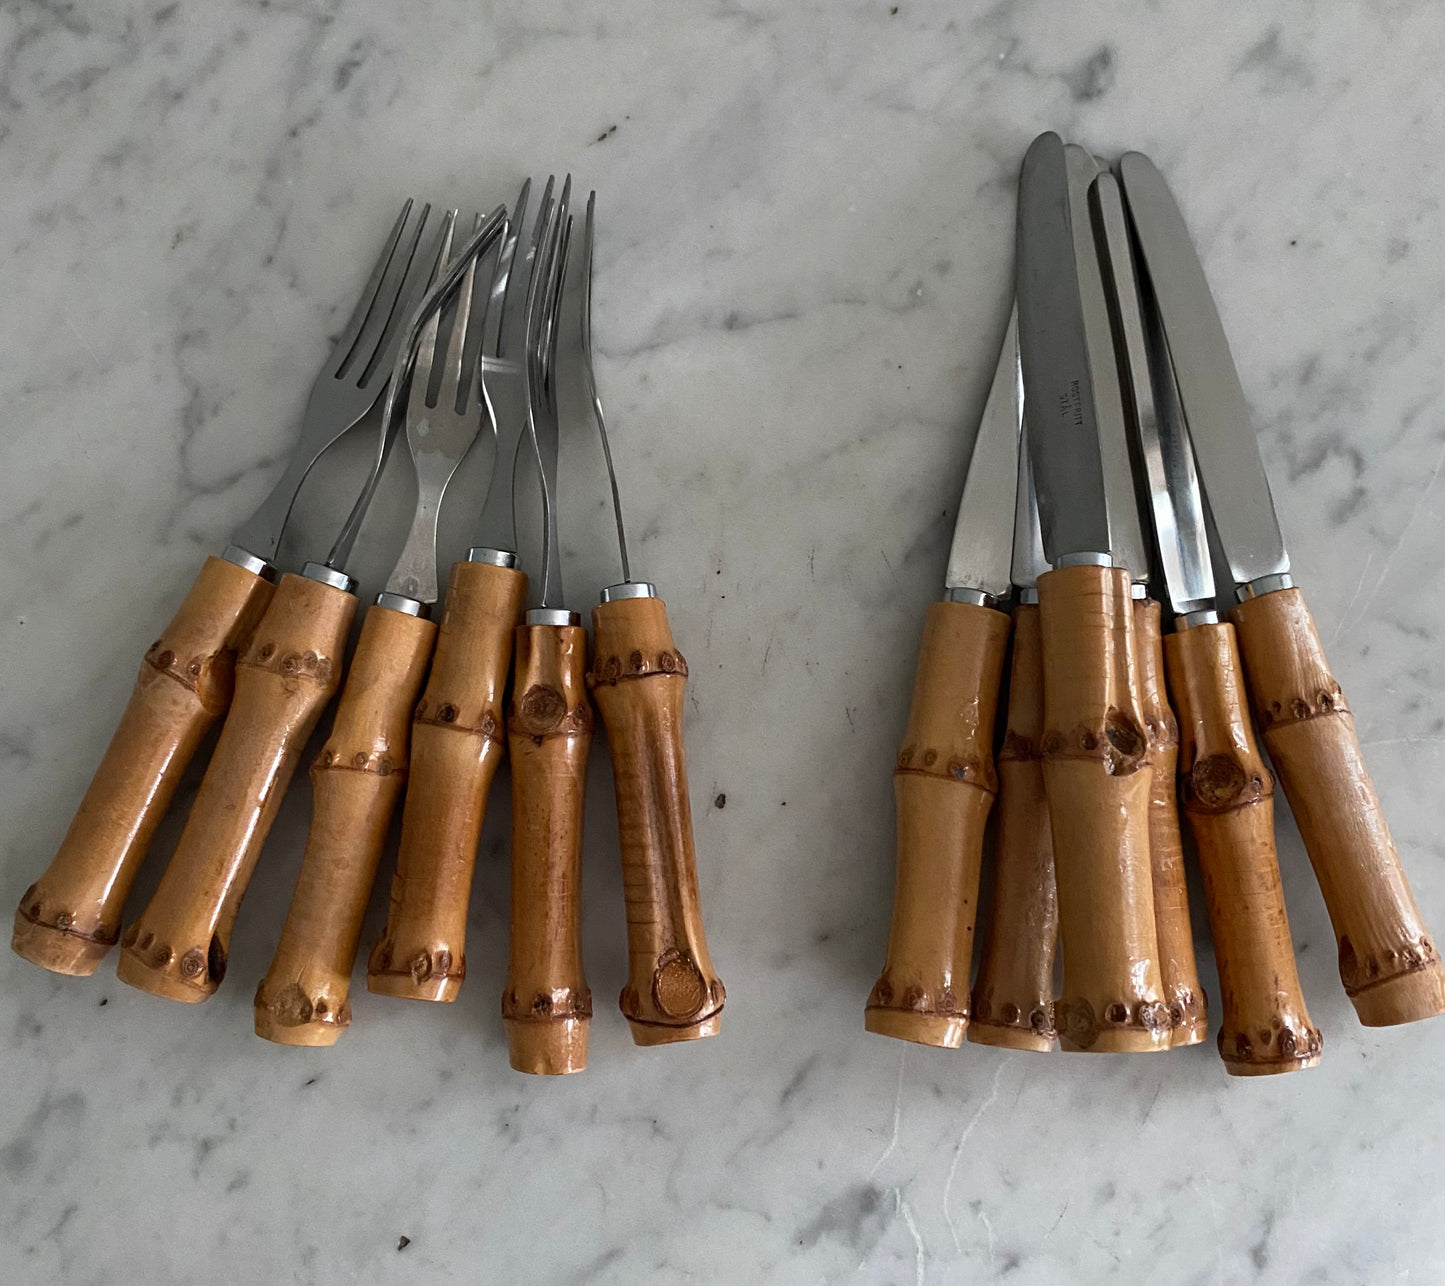 Set of 12 small vintage bamboo forks and knives